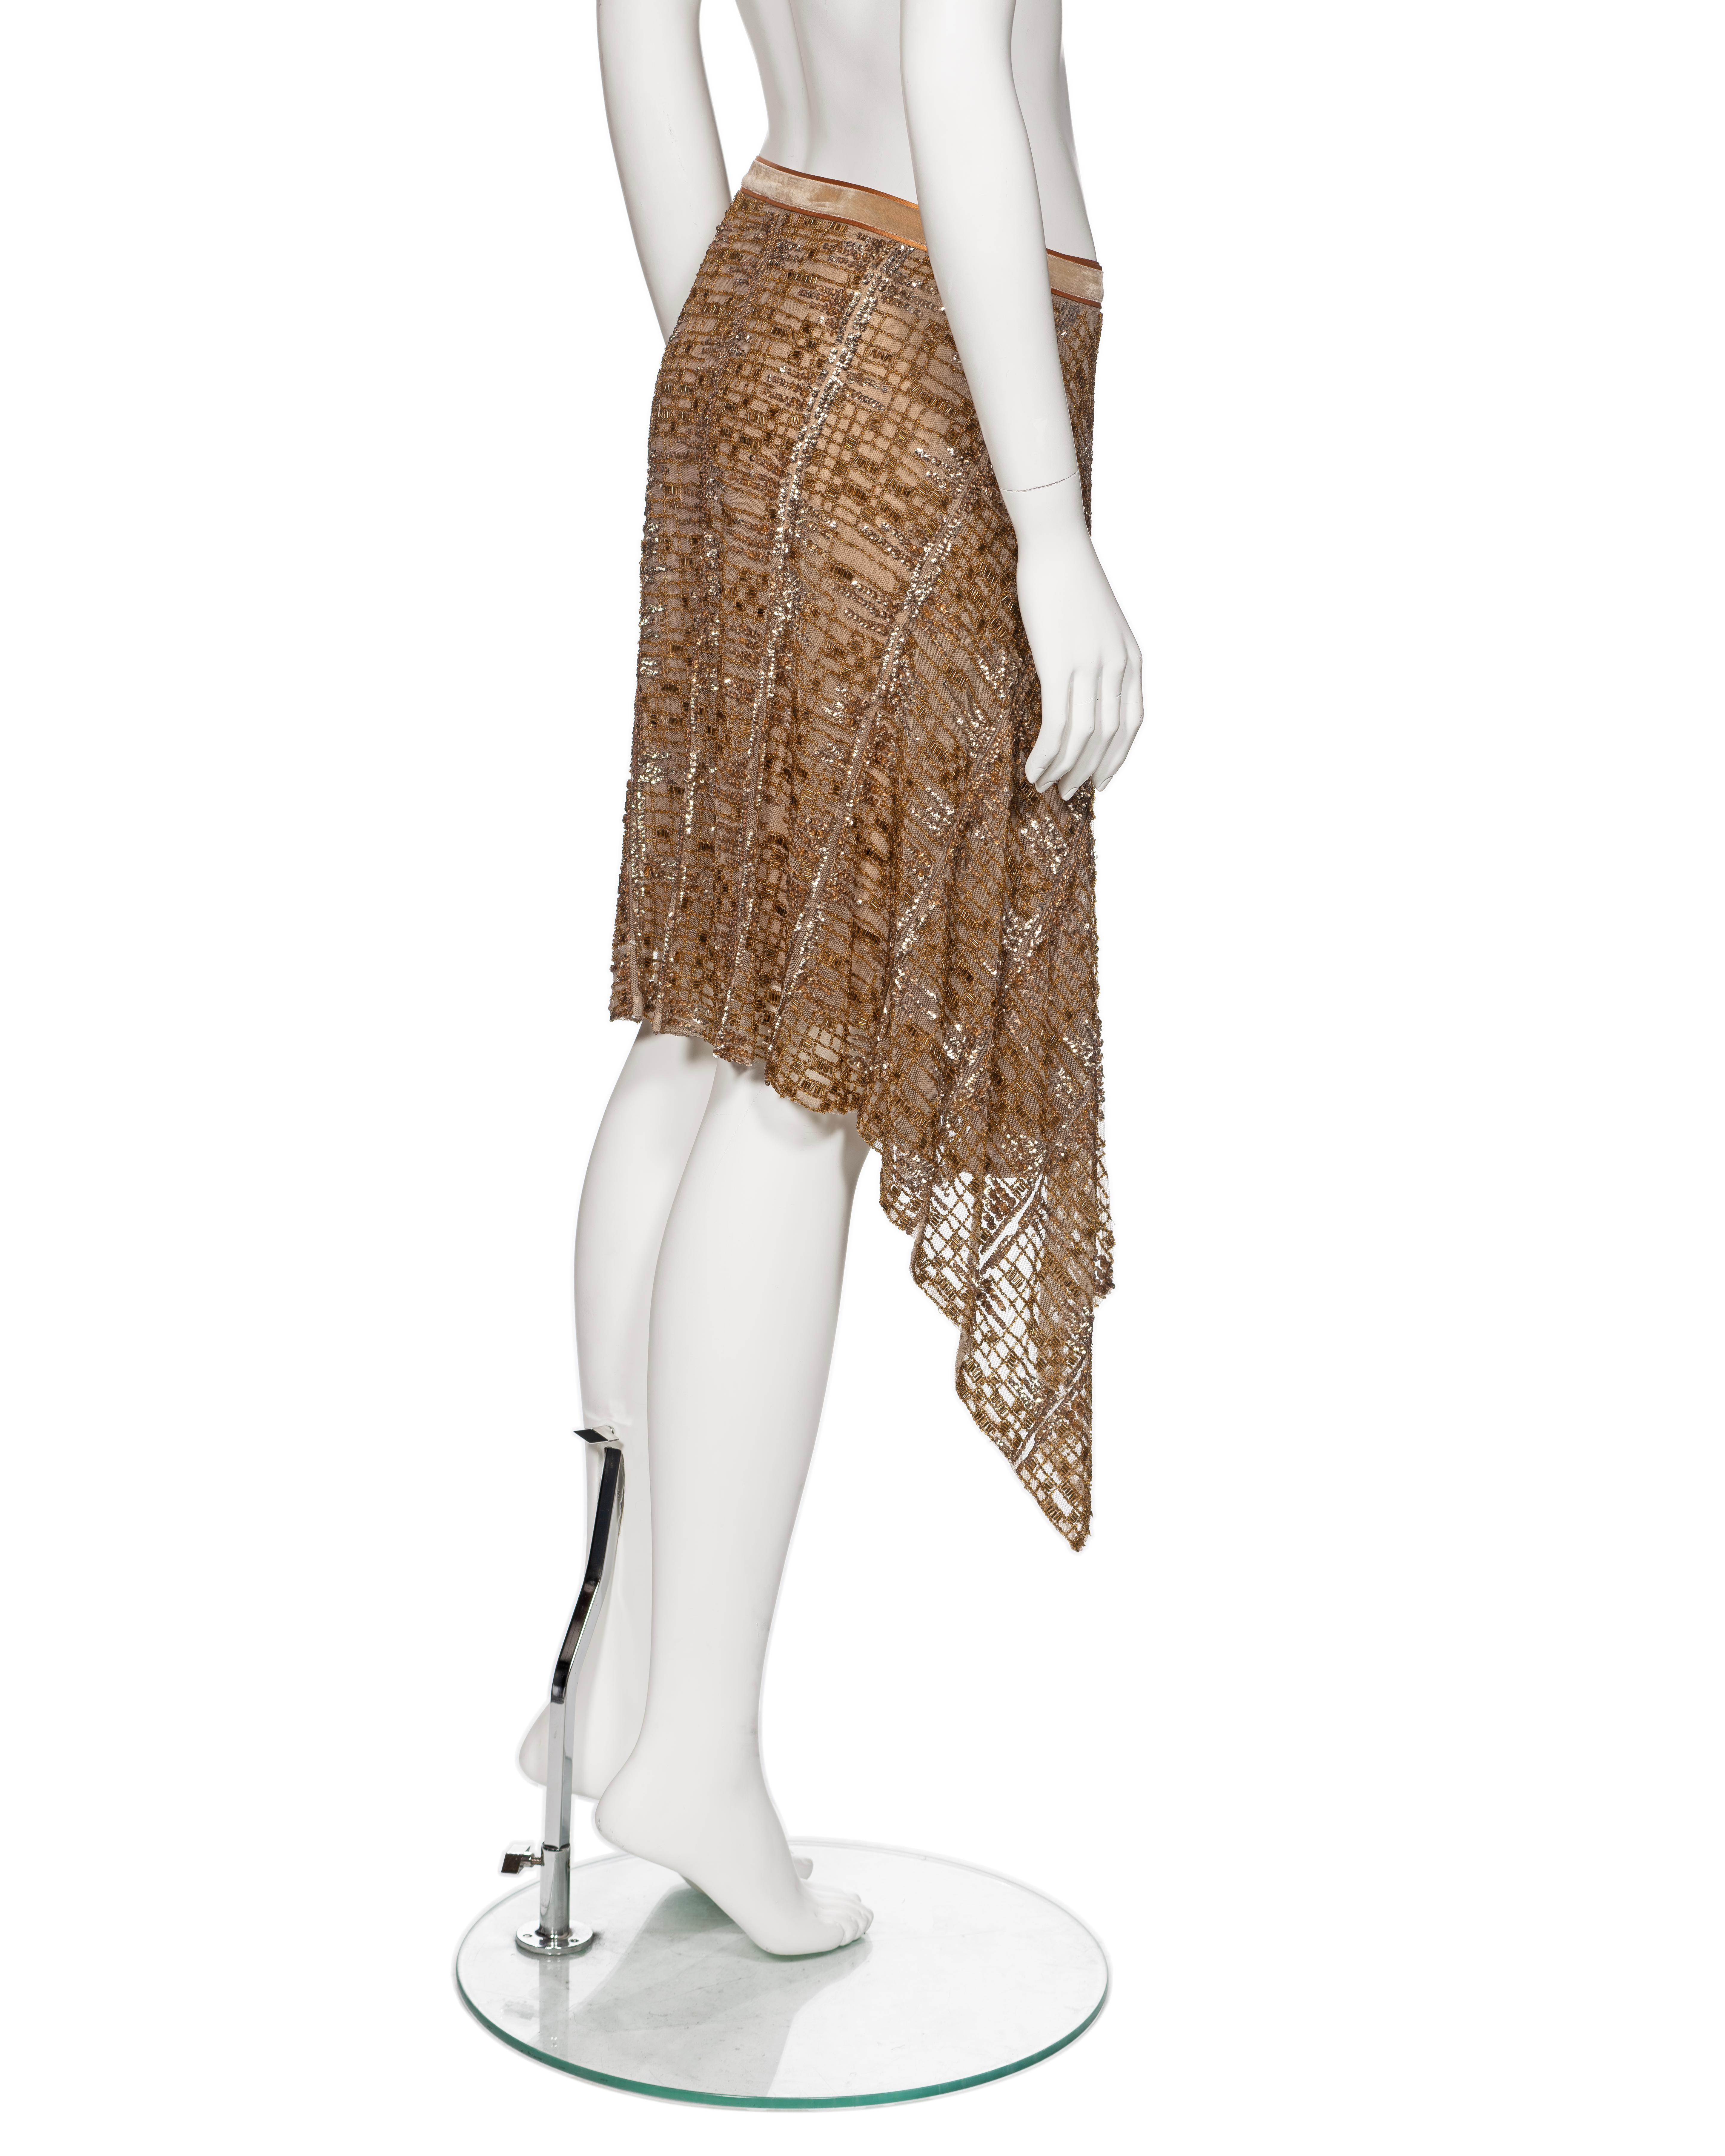 Blumarine by Anna Molinari Copper Beaded and Sequin Mesh Wrap Skirt, FW 2001 For Sale 3